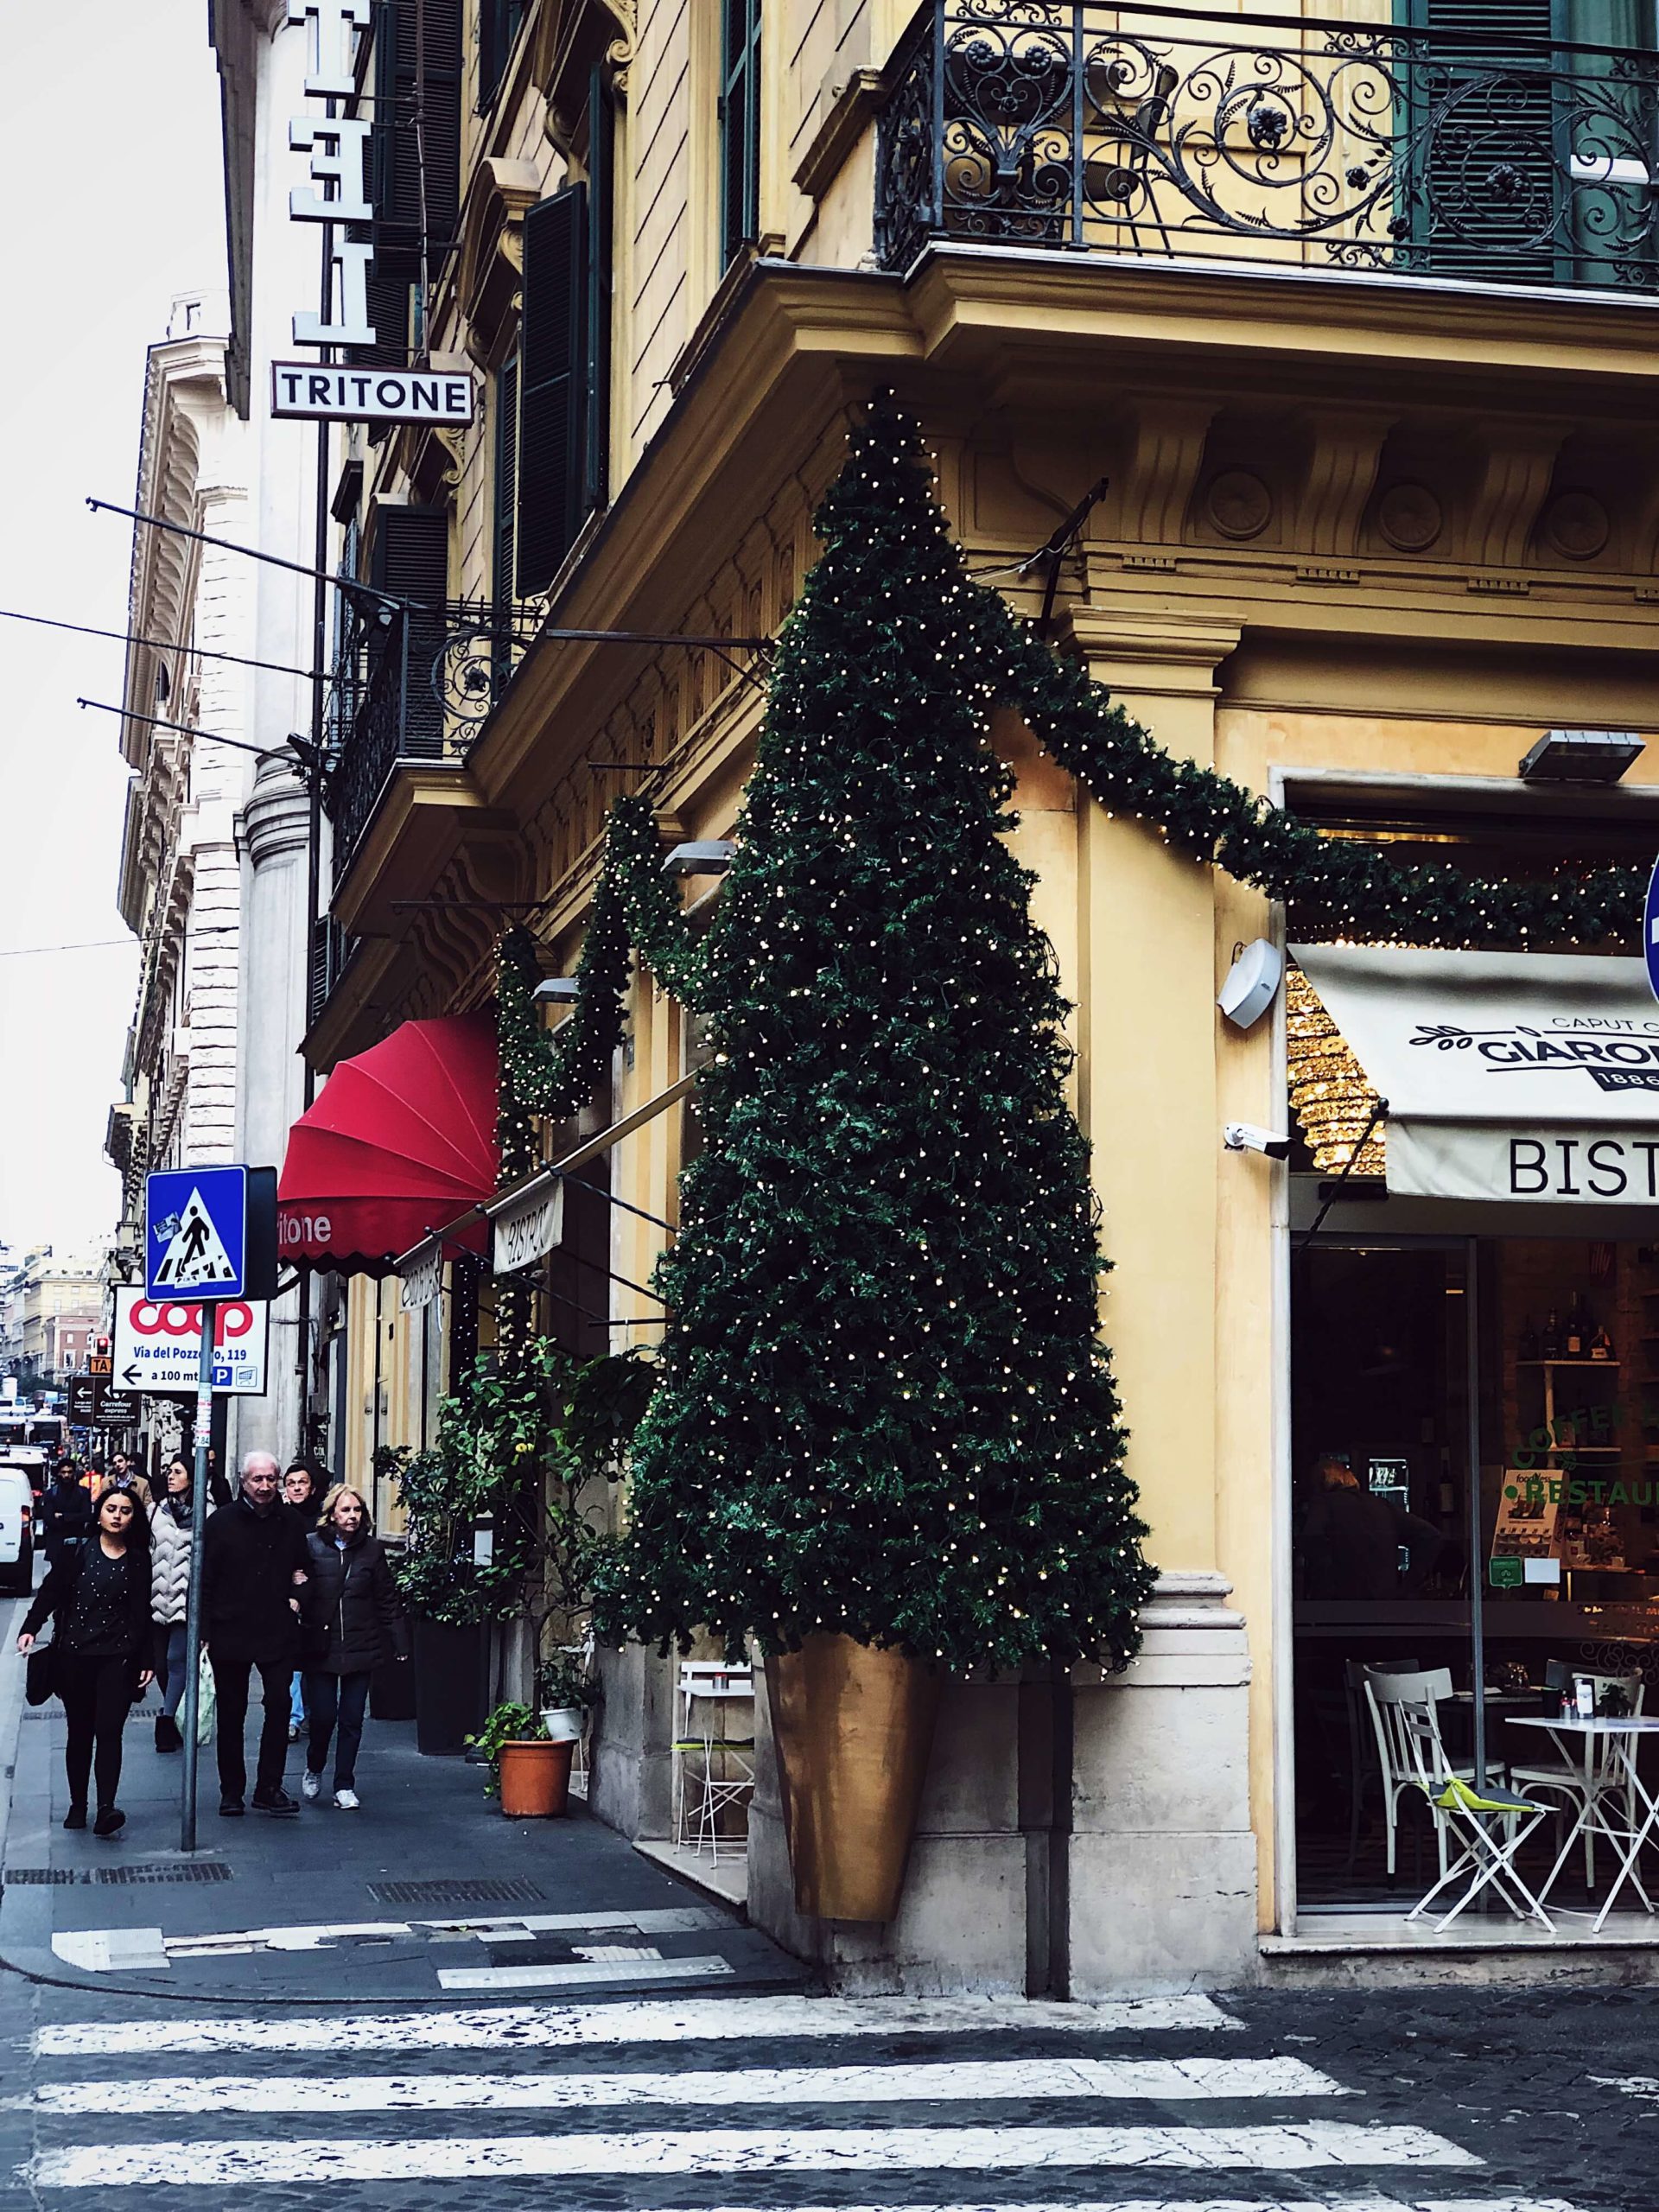 a Christmas tree in the streets of Rome